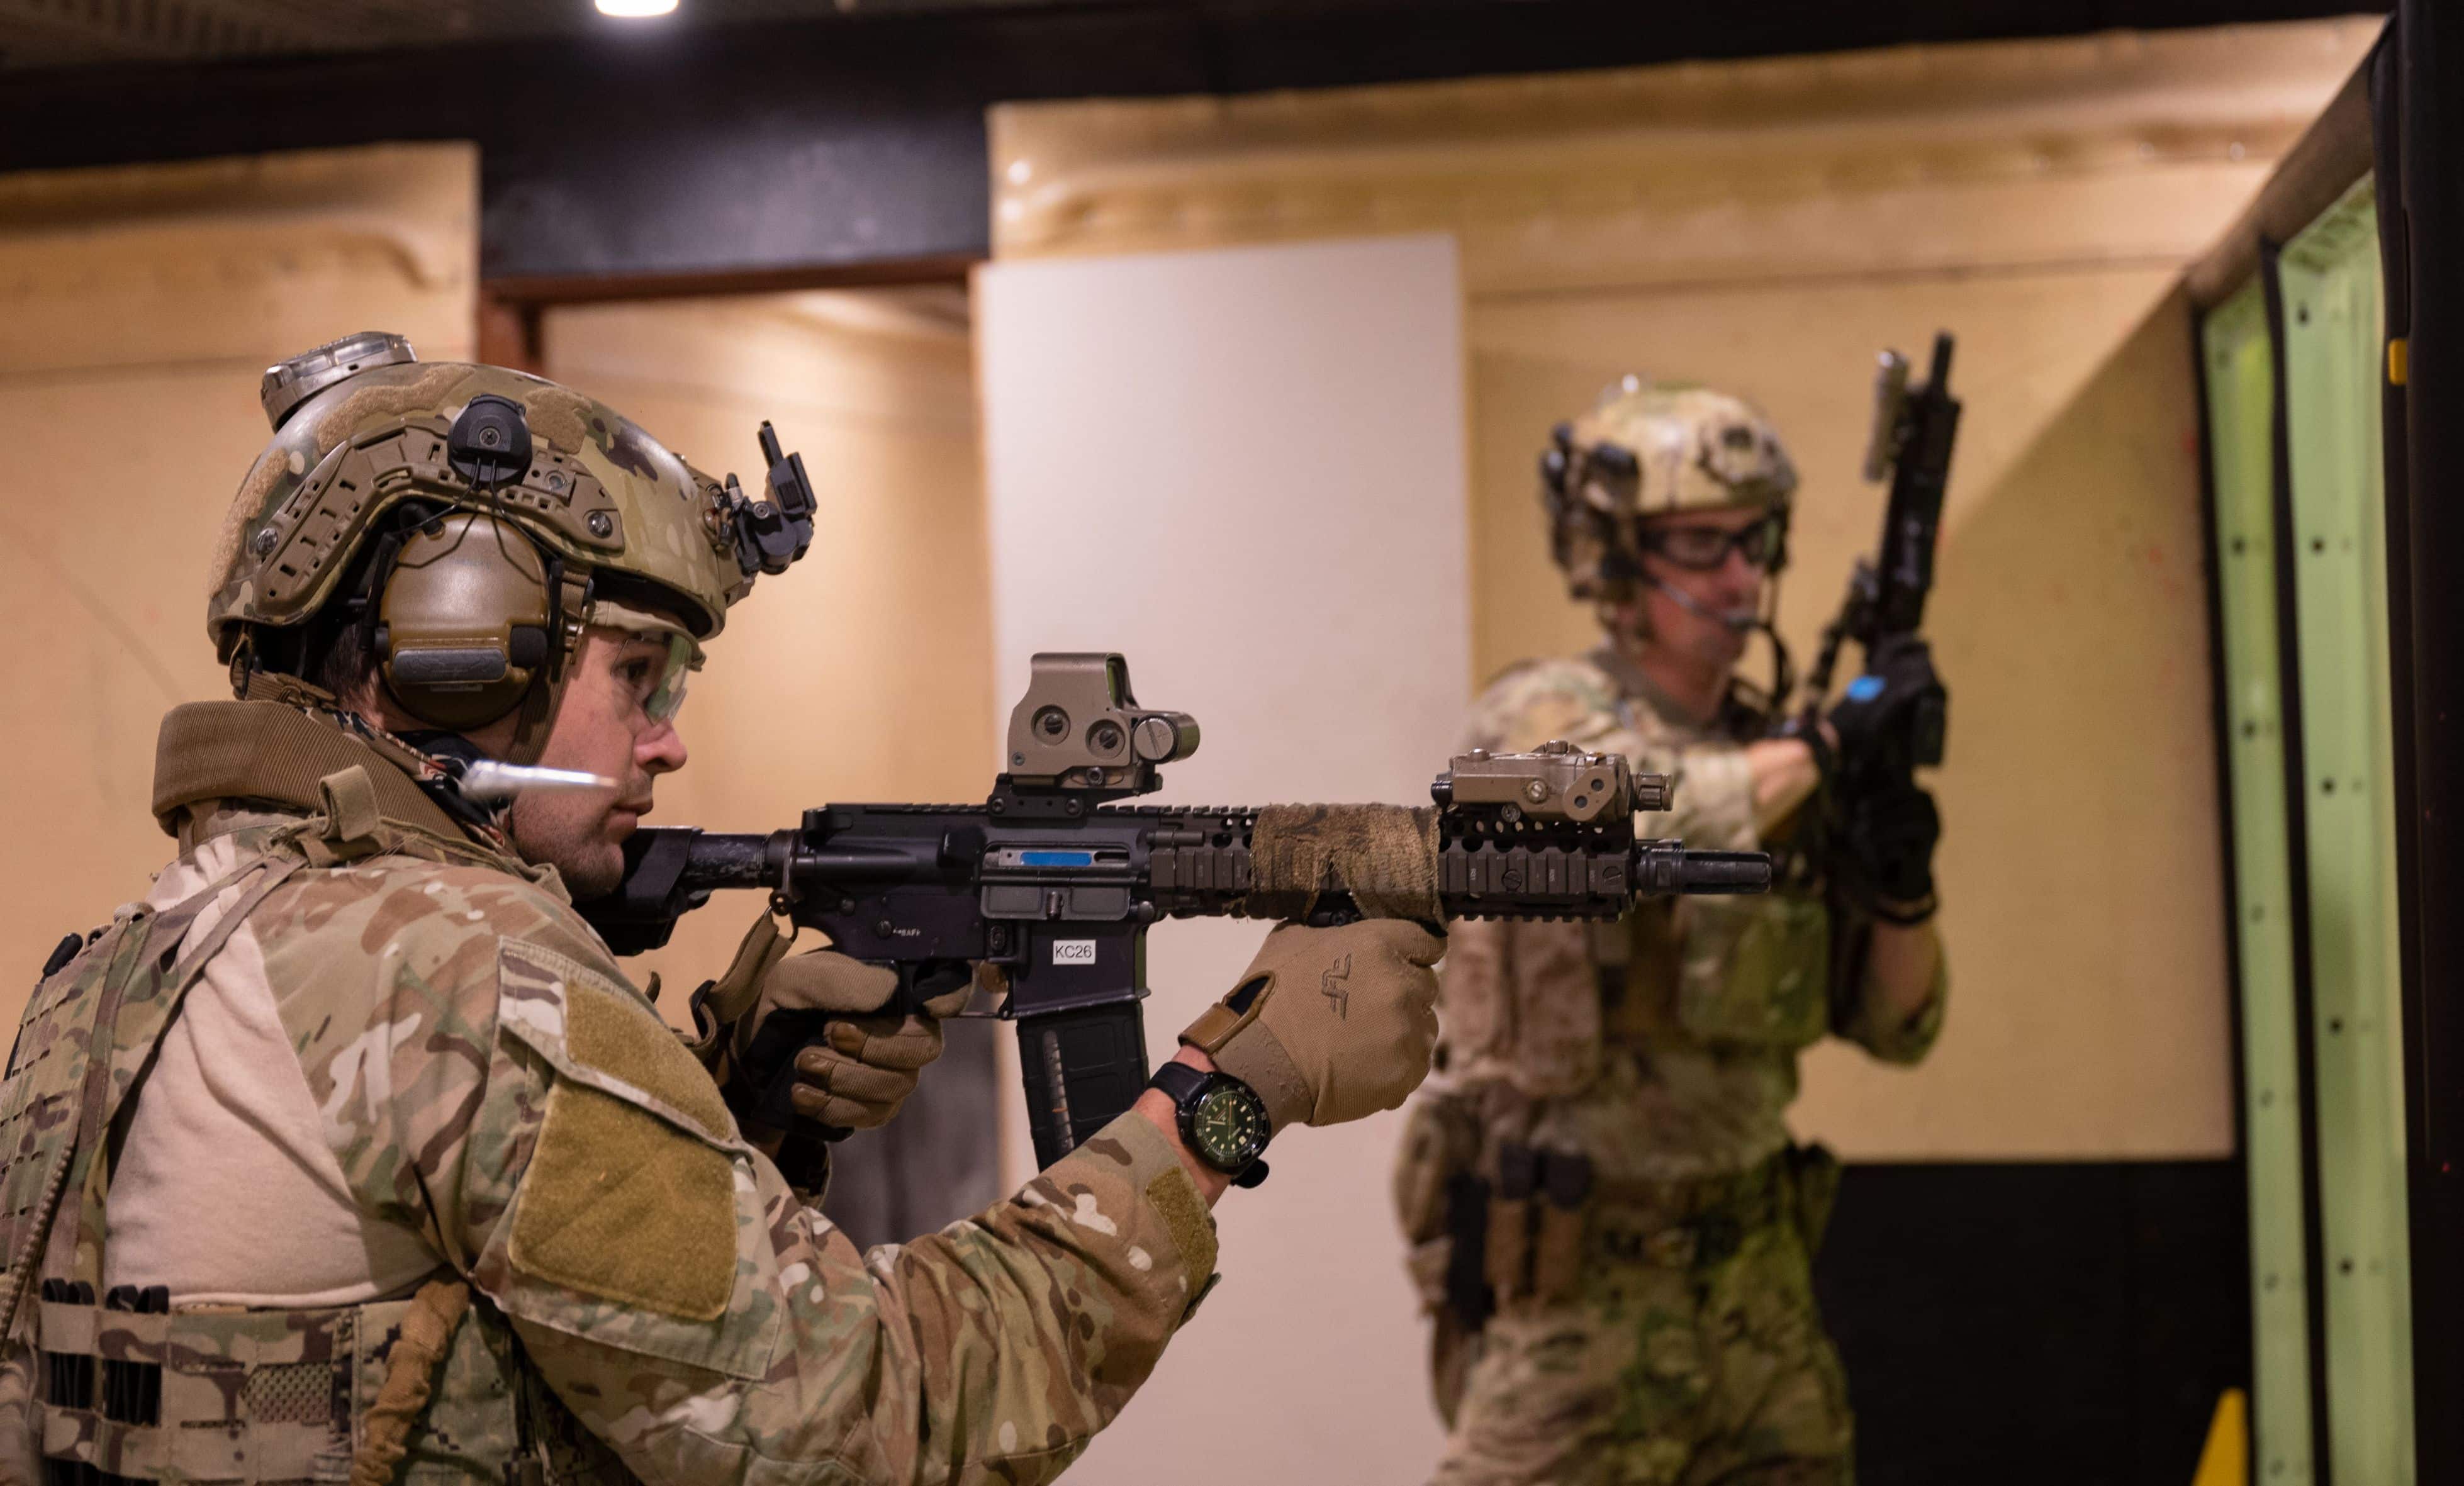 Operators from a U.S. Naval Special Warfare Unit shoot simulated targets while rehearsing close quarter combat scenarios alongside the Australian Army 2nd Commando Regiment at Holsworthy Barracks in New South Wales, Australia during Talisman Sabre